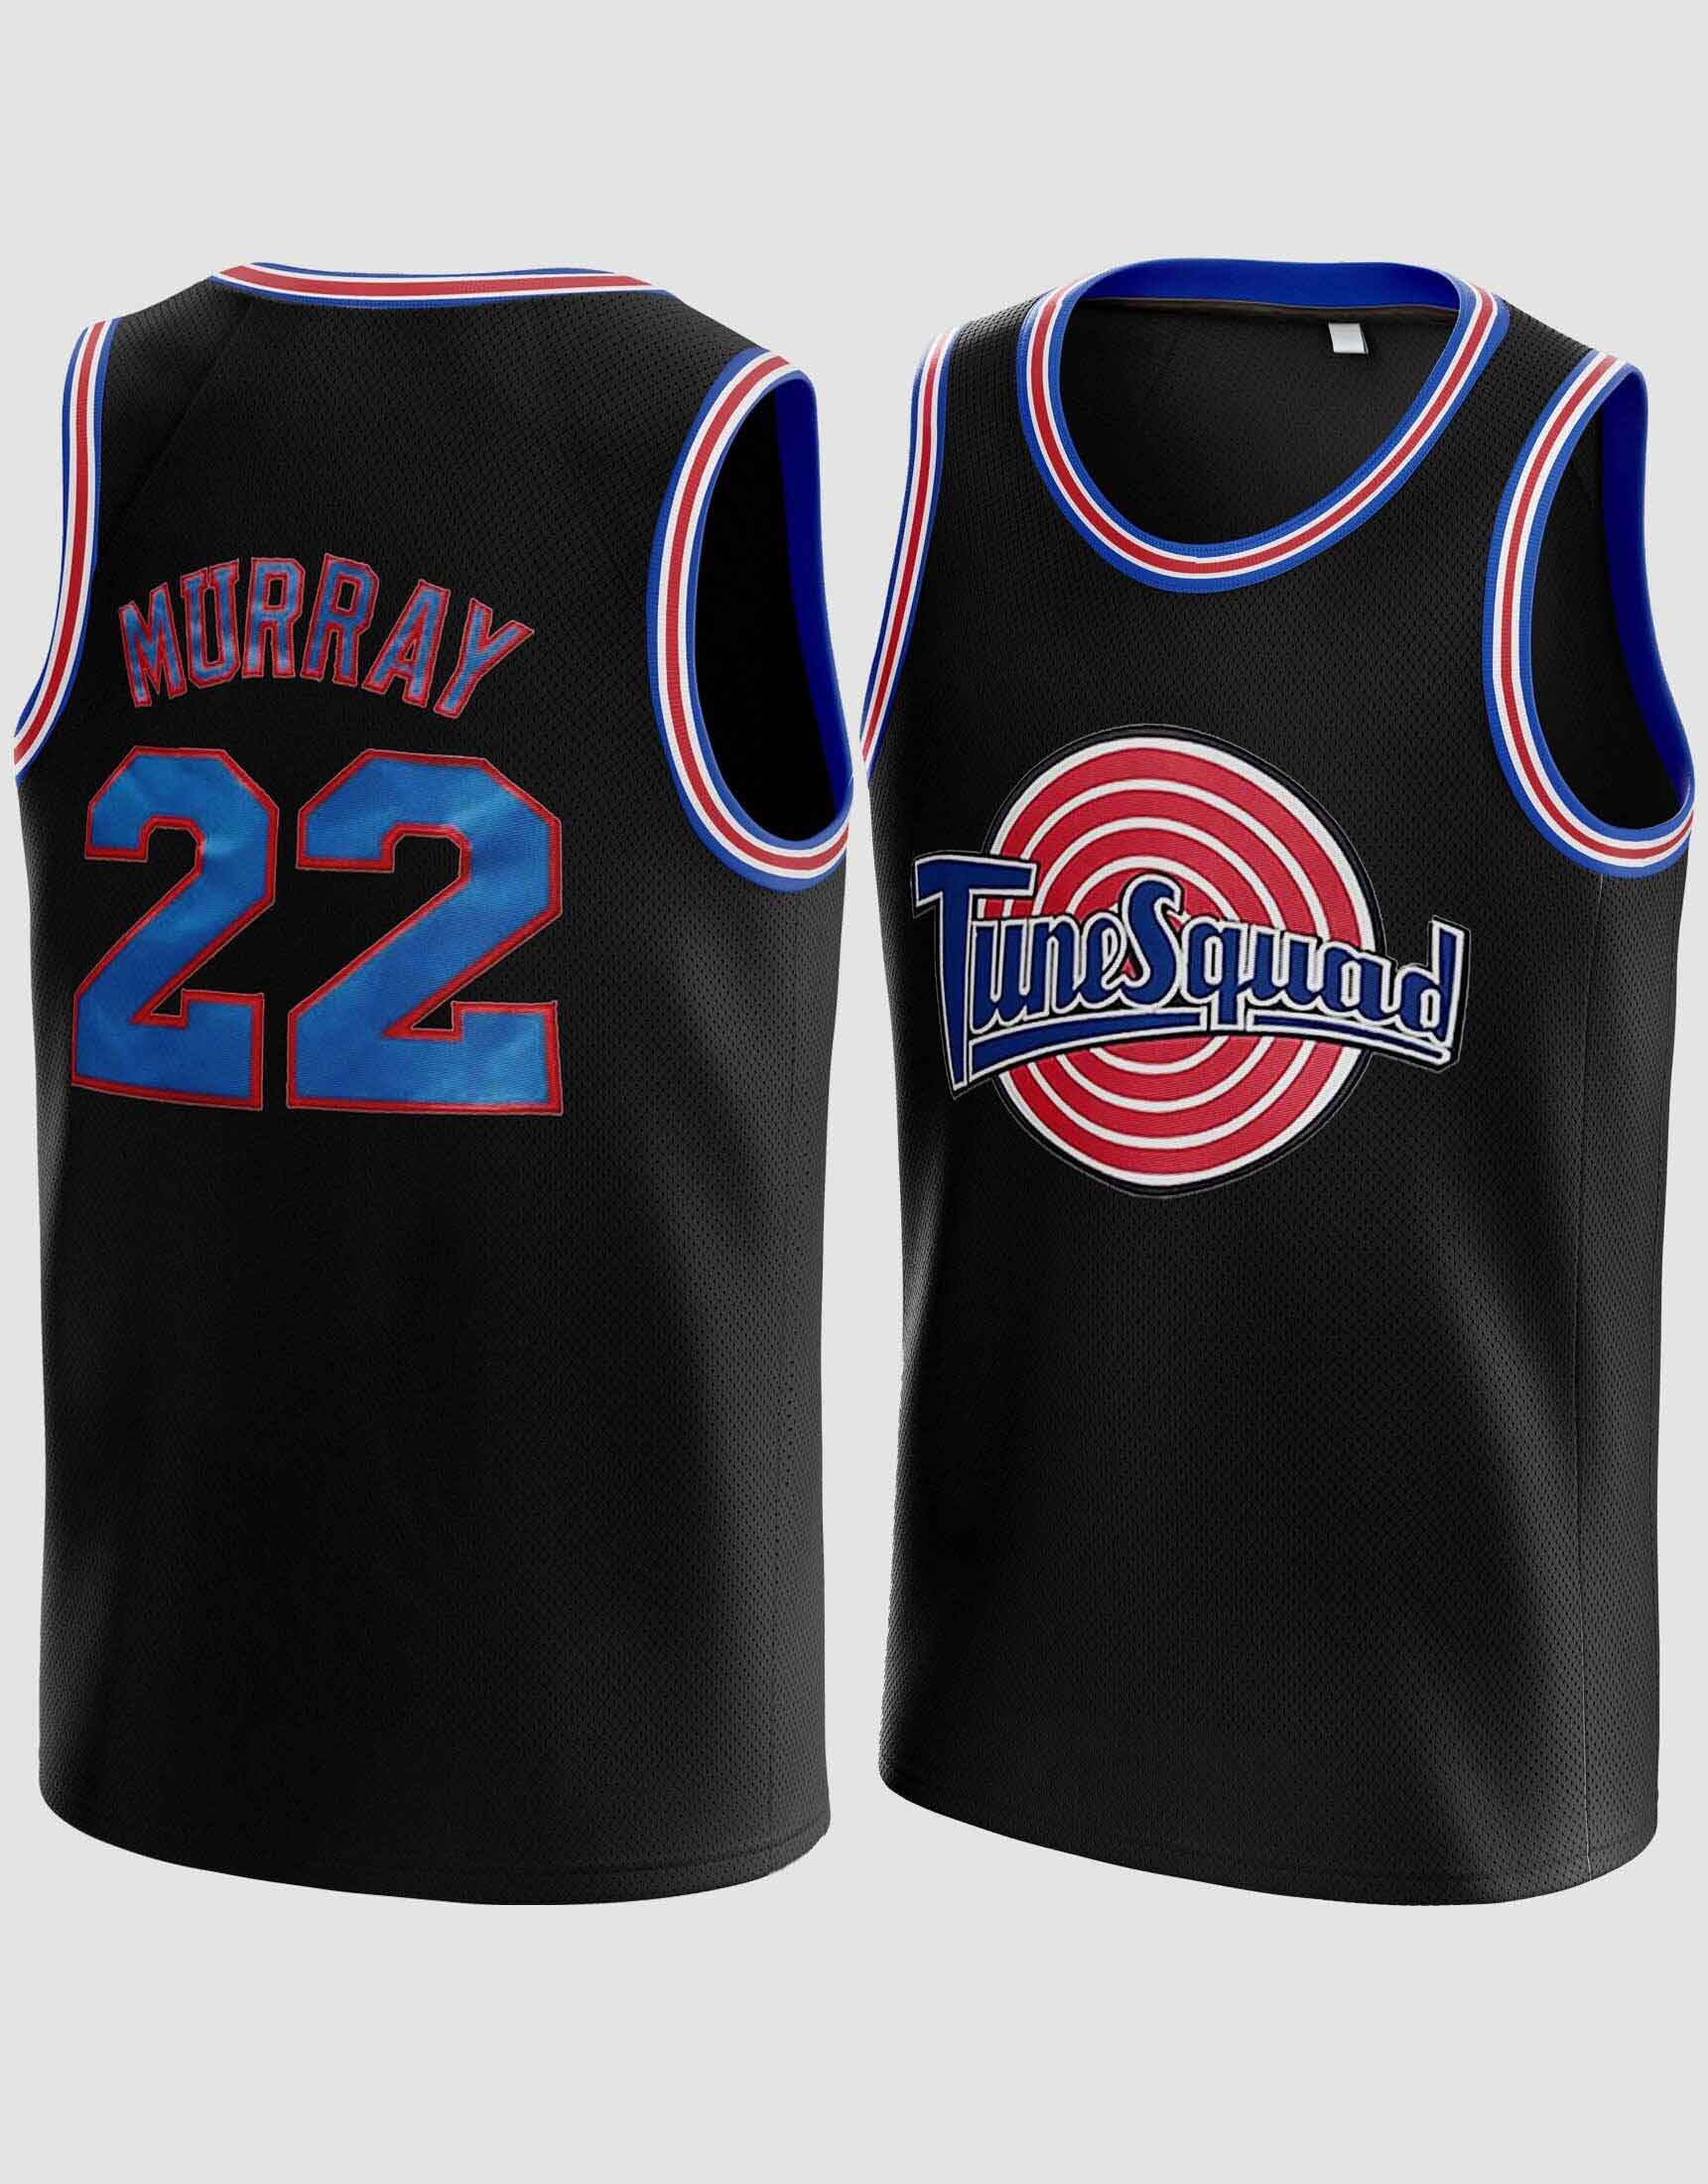 Buy Bill Murray #22 Space Jam Tune Squad Jersey – MOLPE